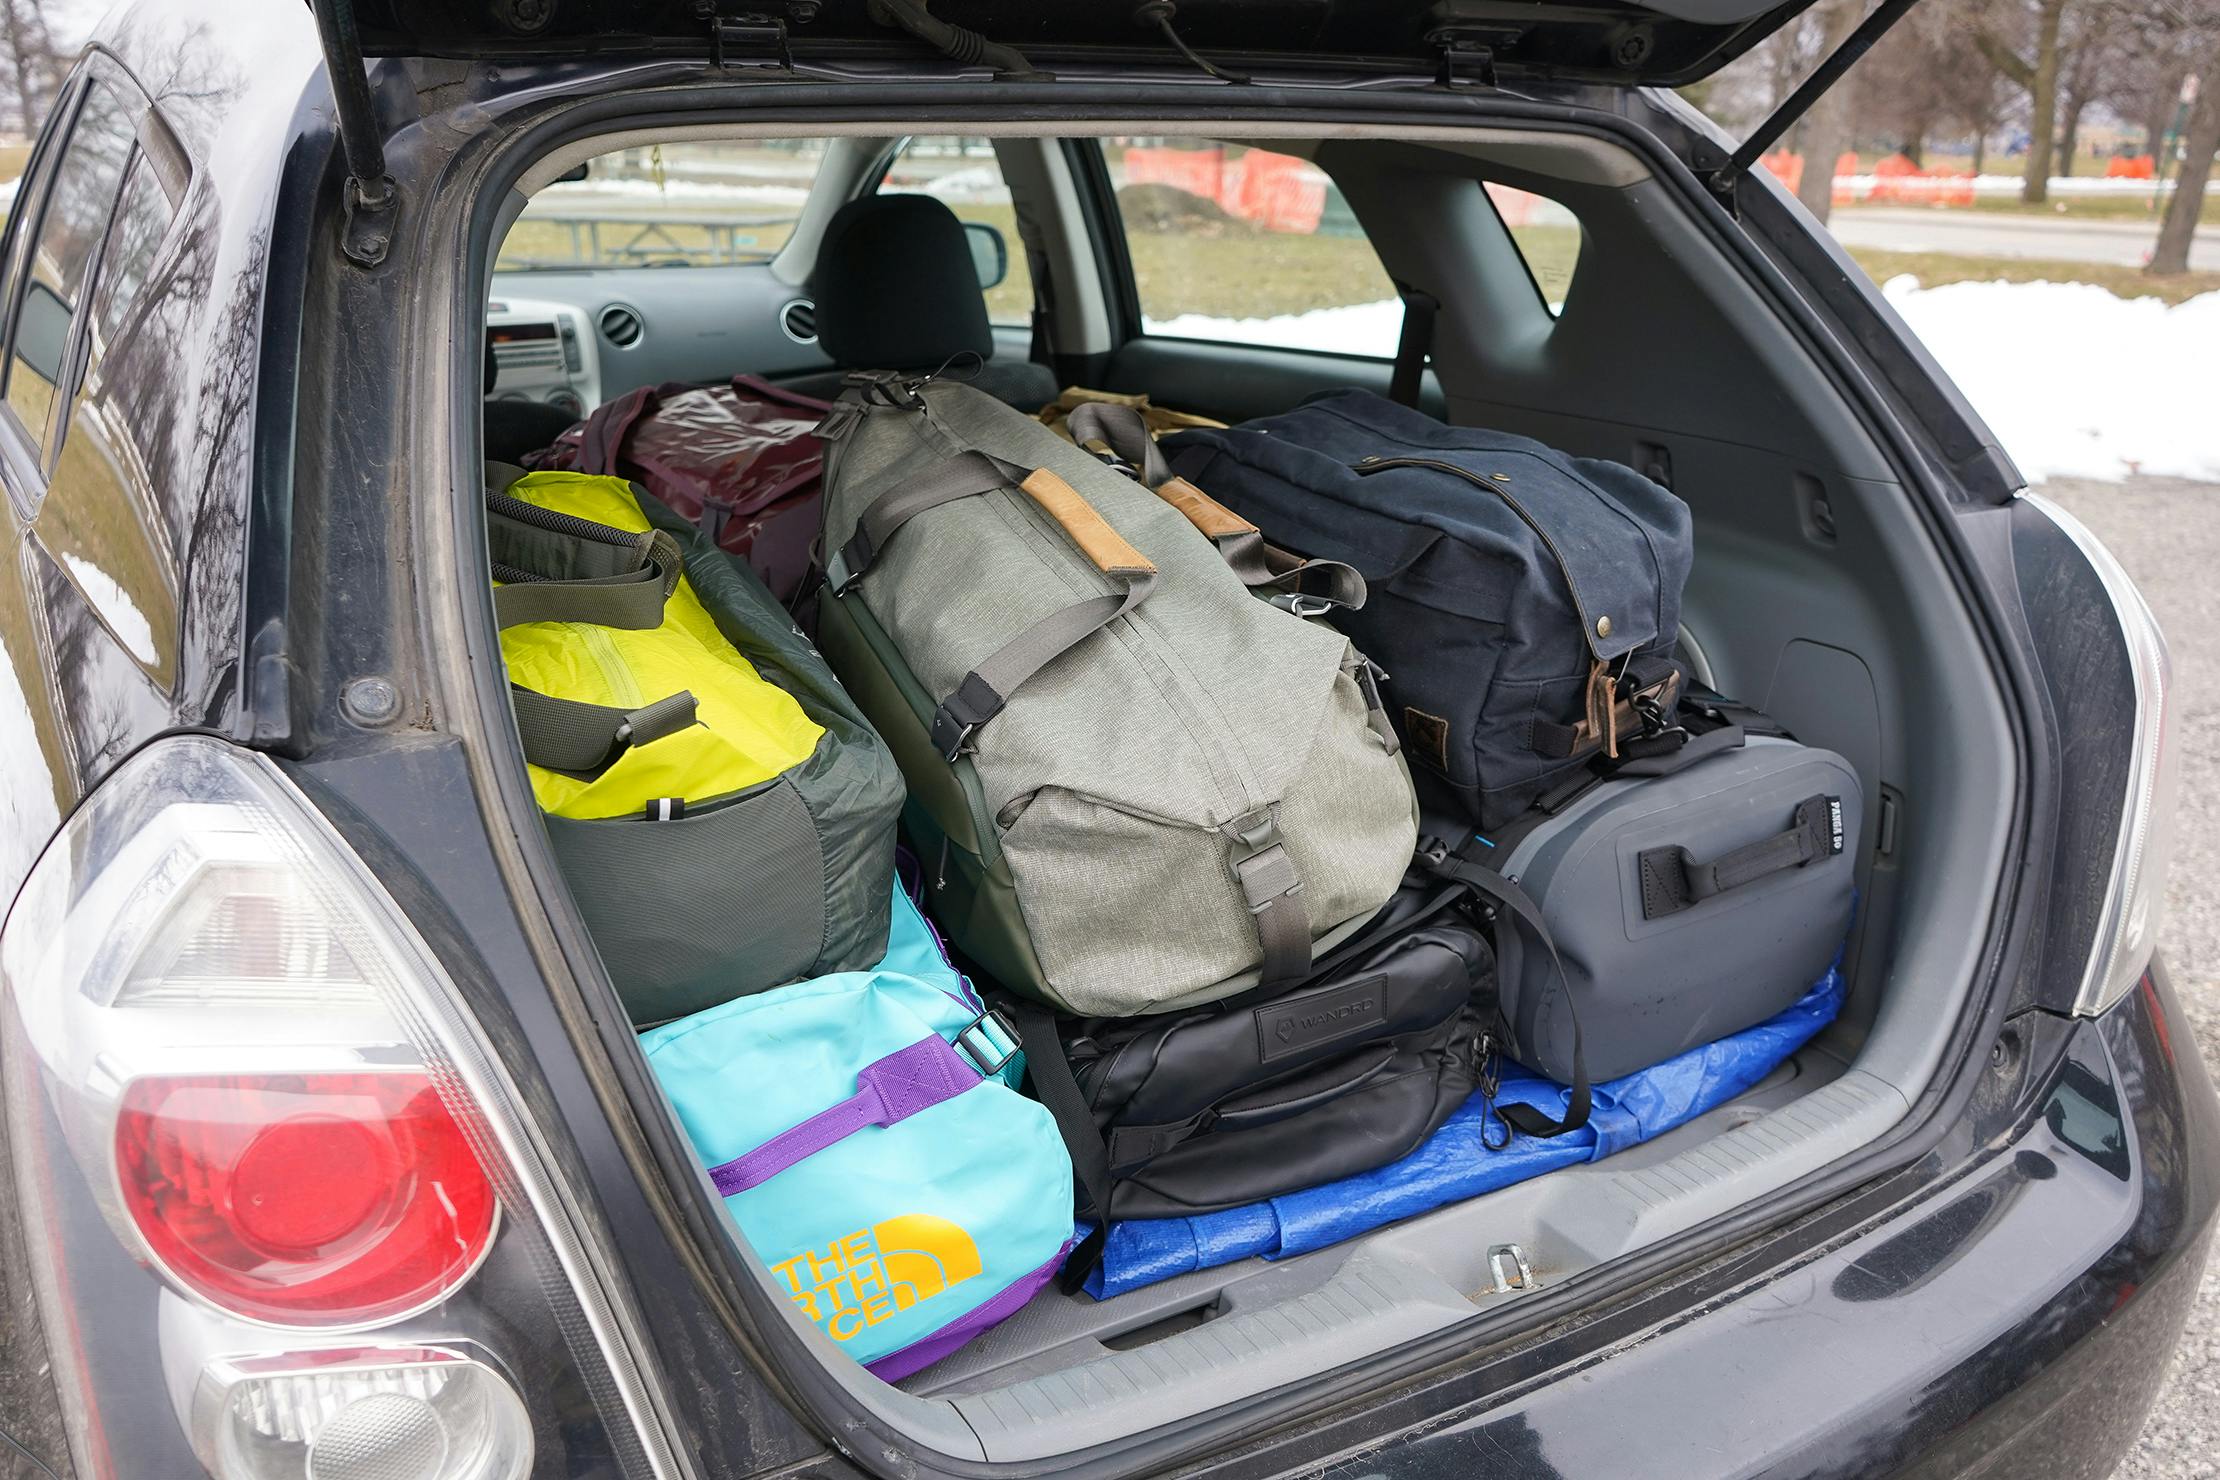 Car packed with duffle bags